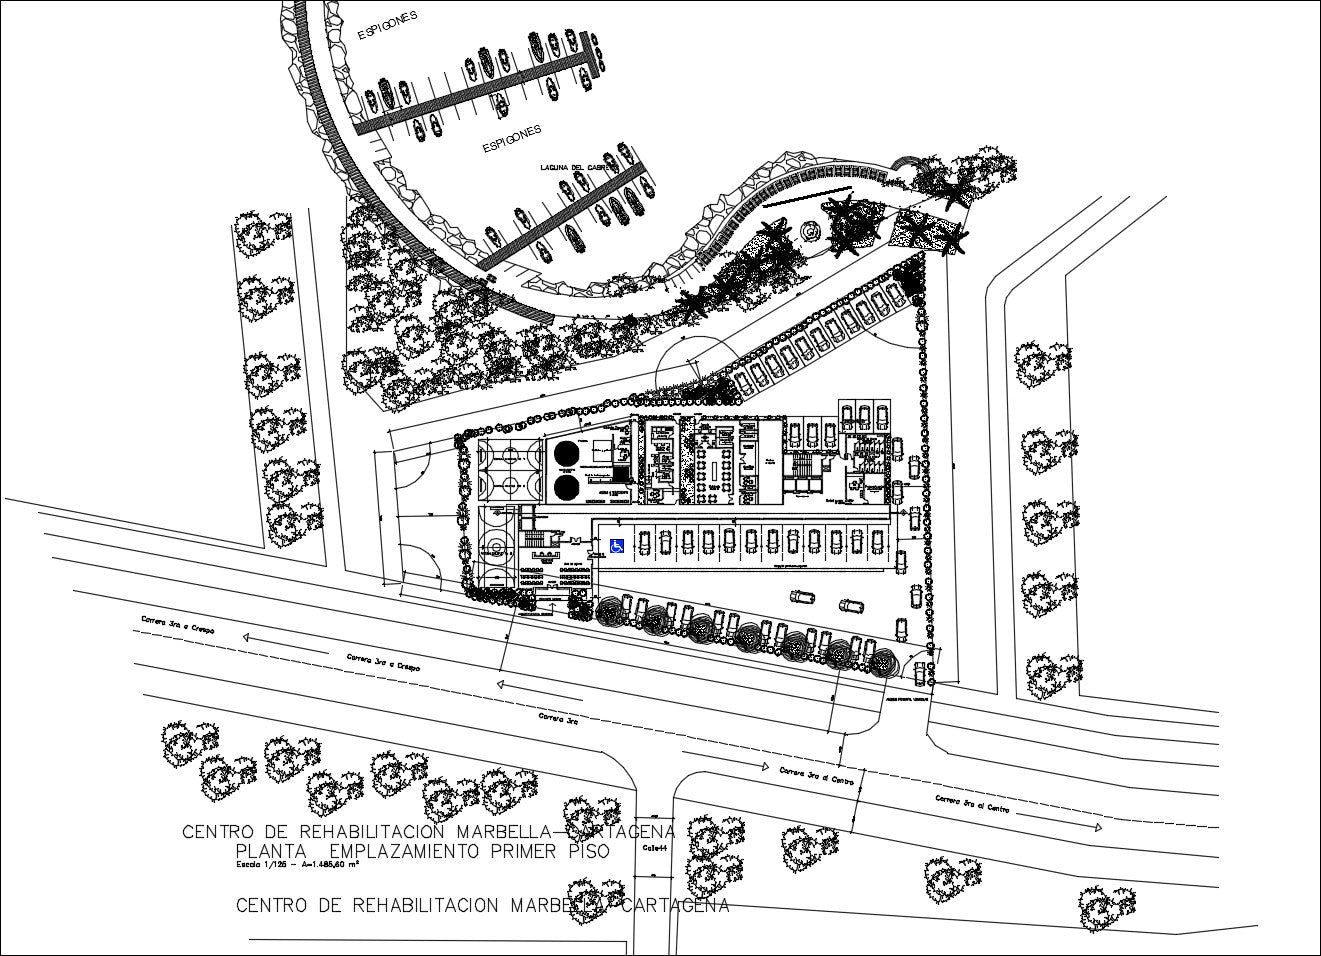 Recovery and rehabilitation center design drawing